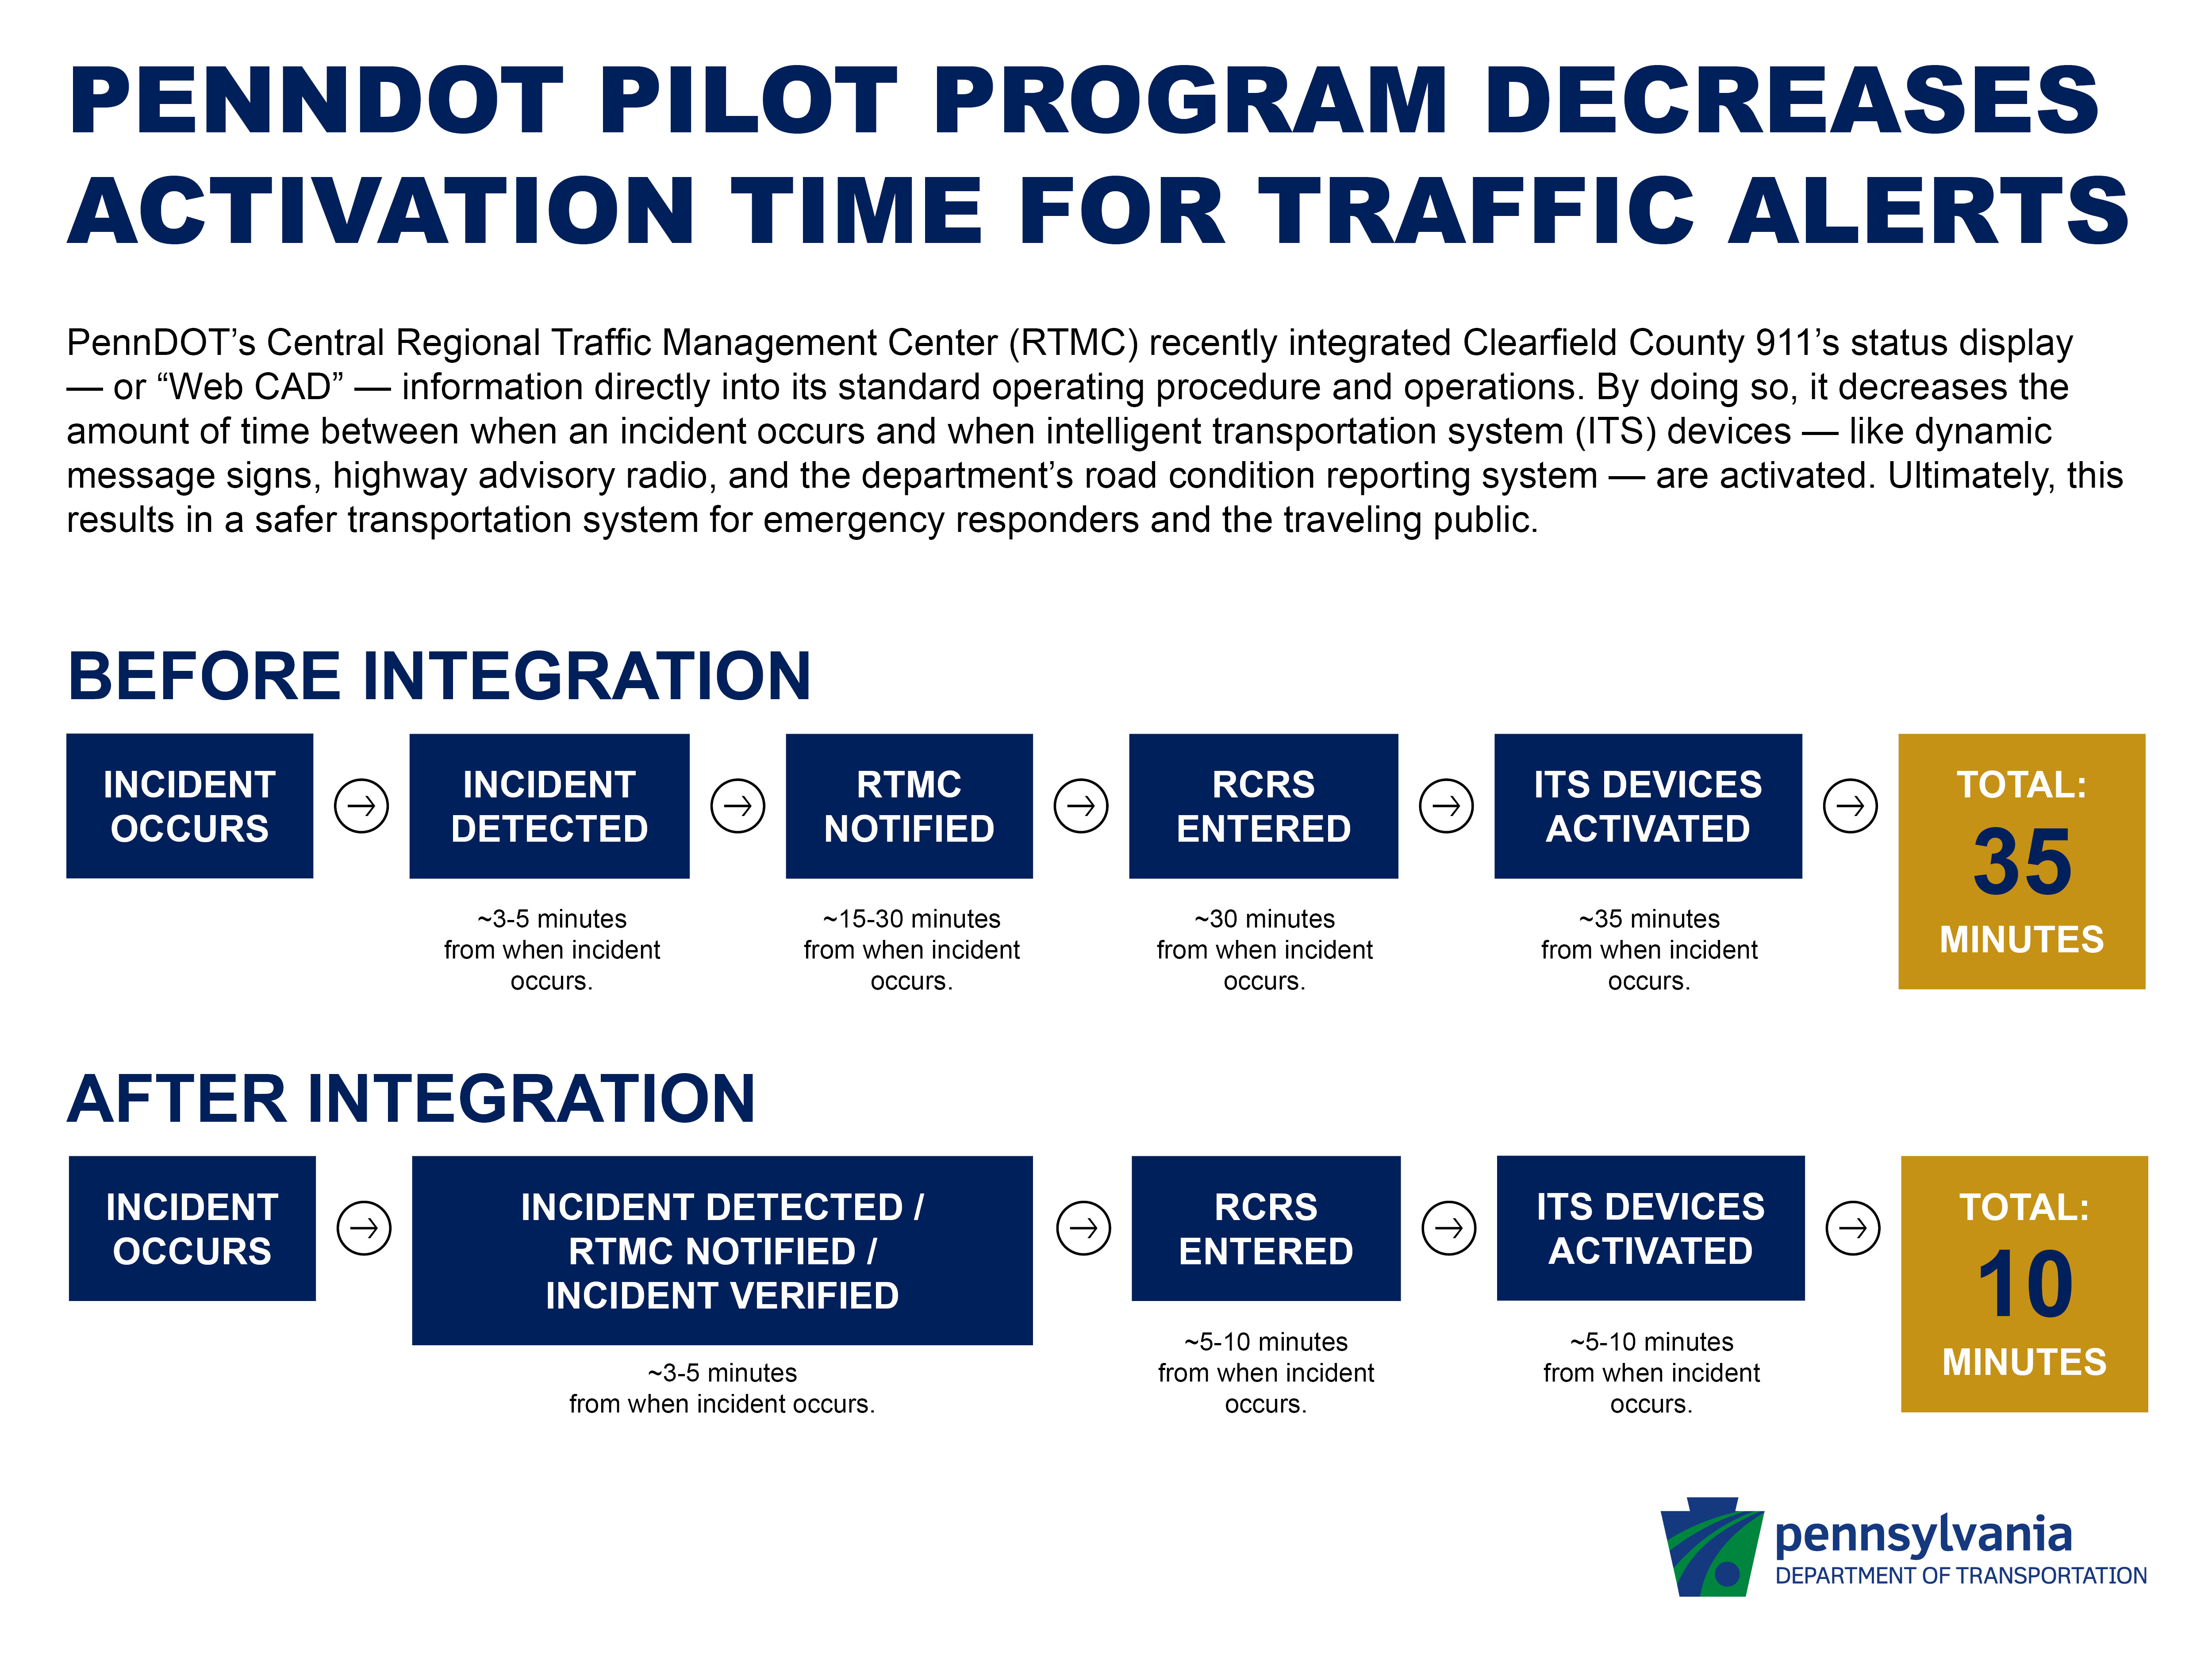 timeline of incident response before and after pilot program